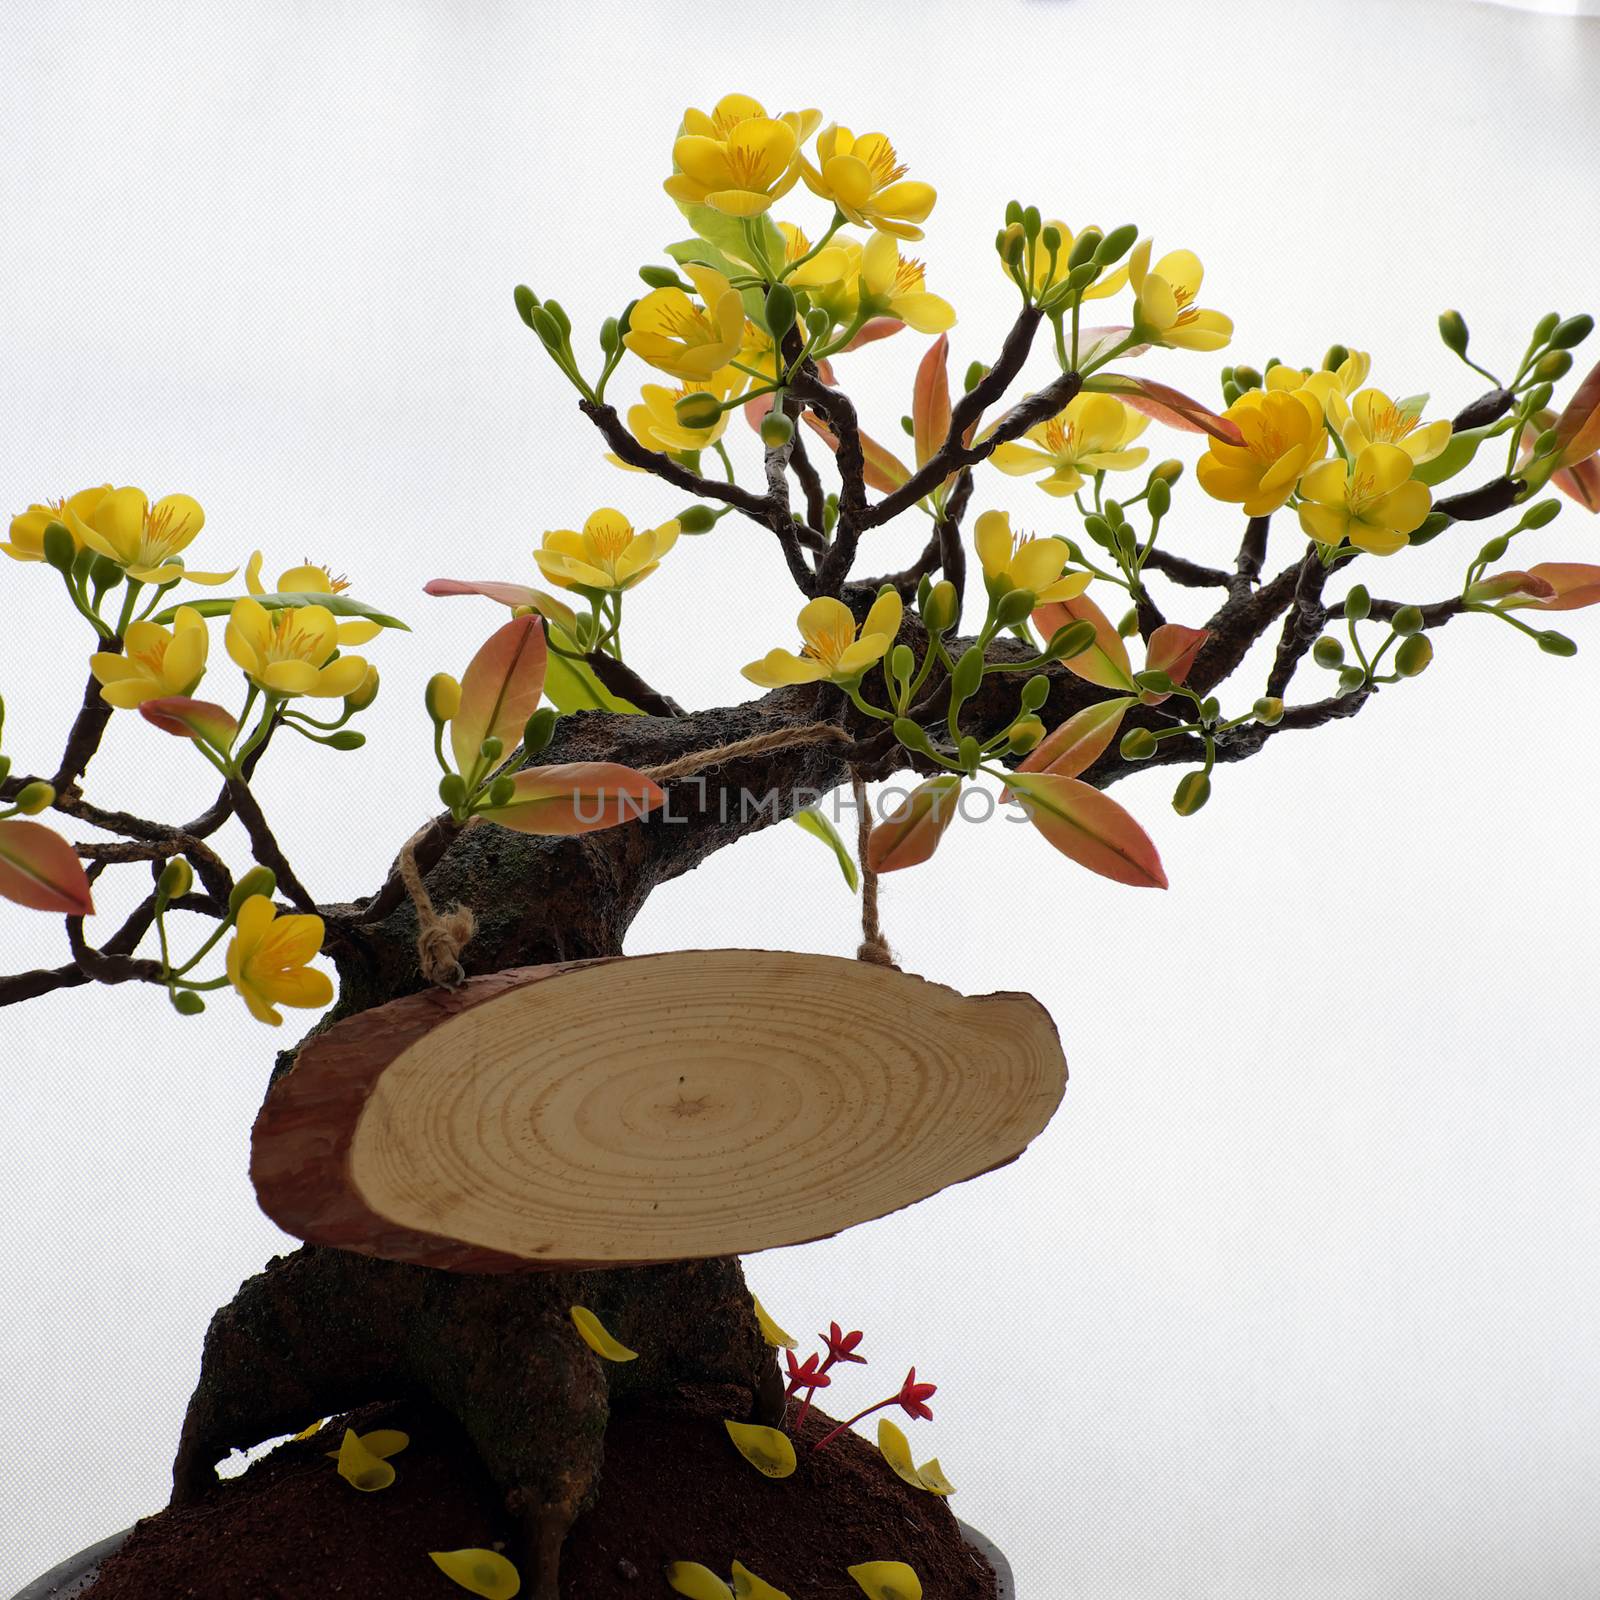 clay apricot blossom for home decoration by xuanhuongho